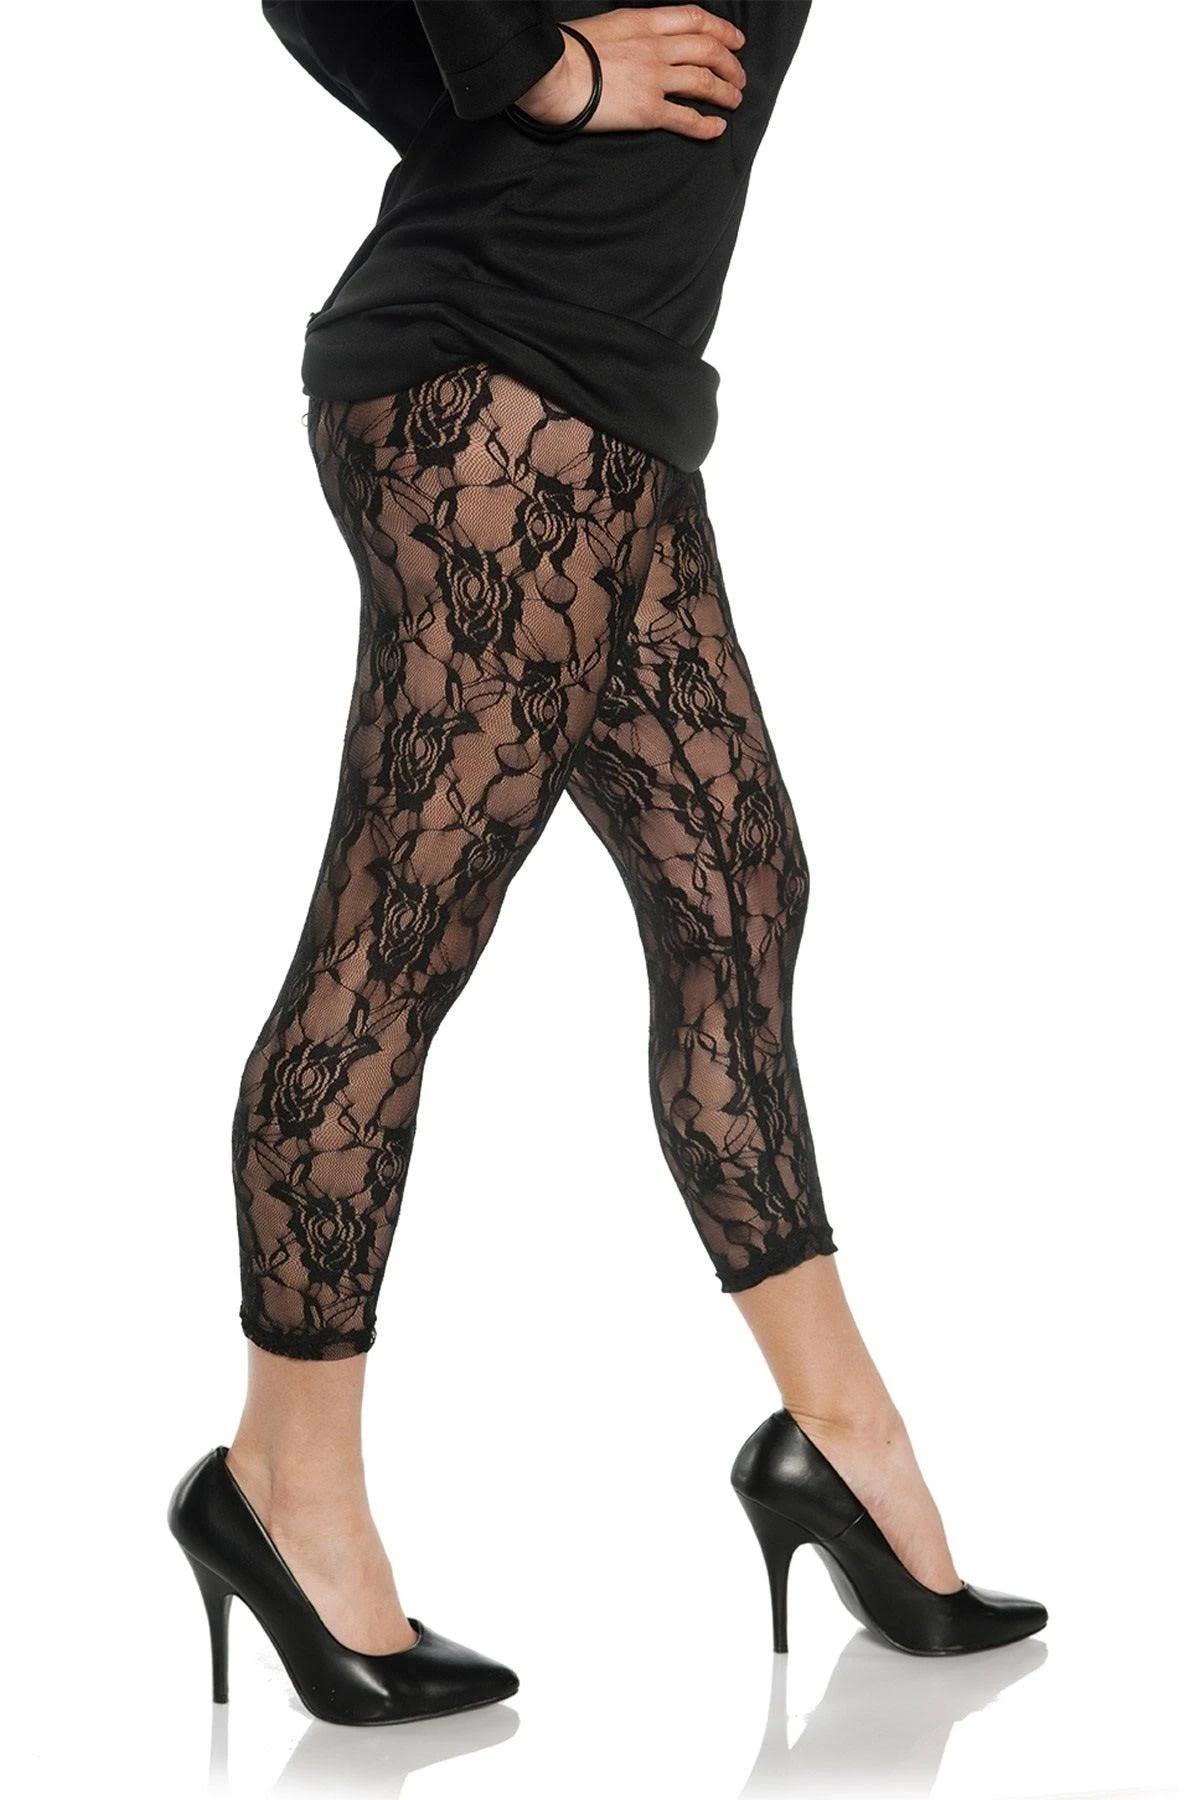 Black Lace Leggings: 80's Inspired Adult Accessory | Image